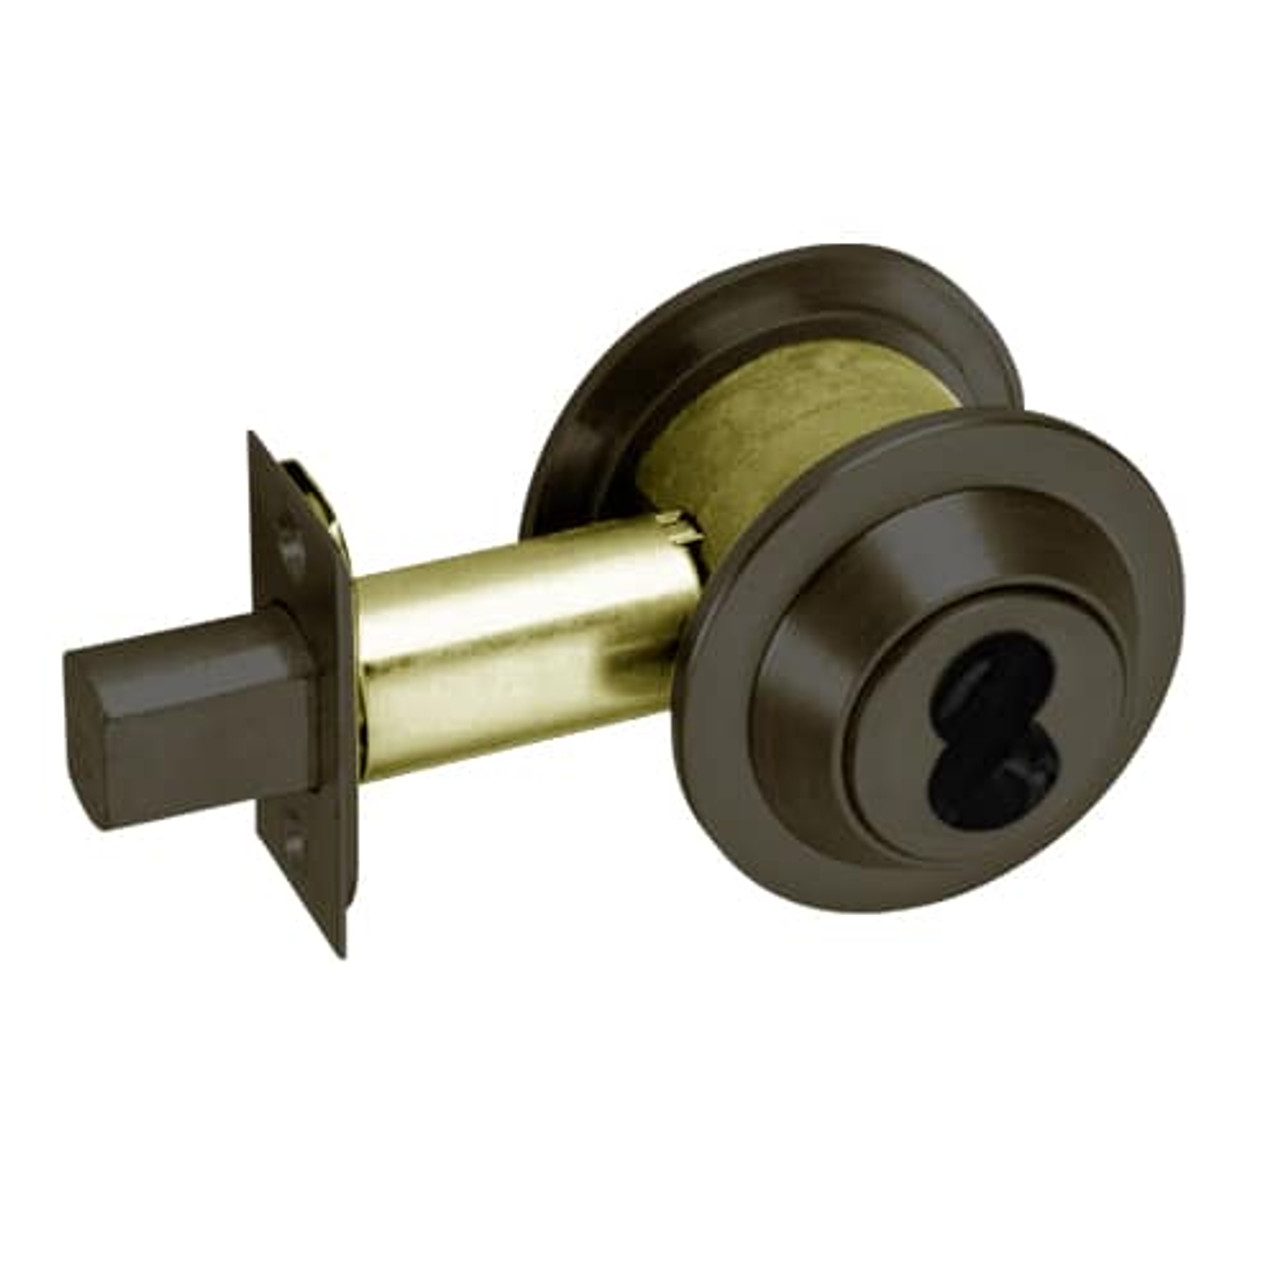 DL3013-613-CL6 Corbin DL3000 Series IC 6-Pin Less Core Cylindrical Deadlocks with Single Cylinder in Oil Rubbed Bronze Finish